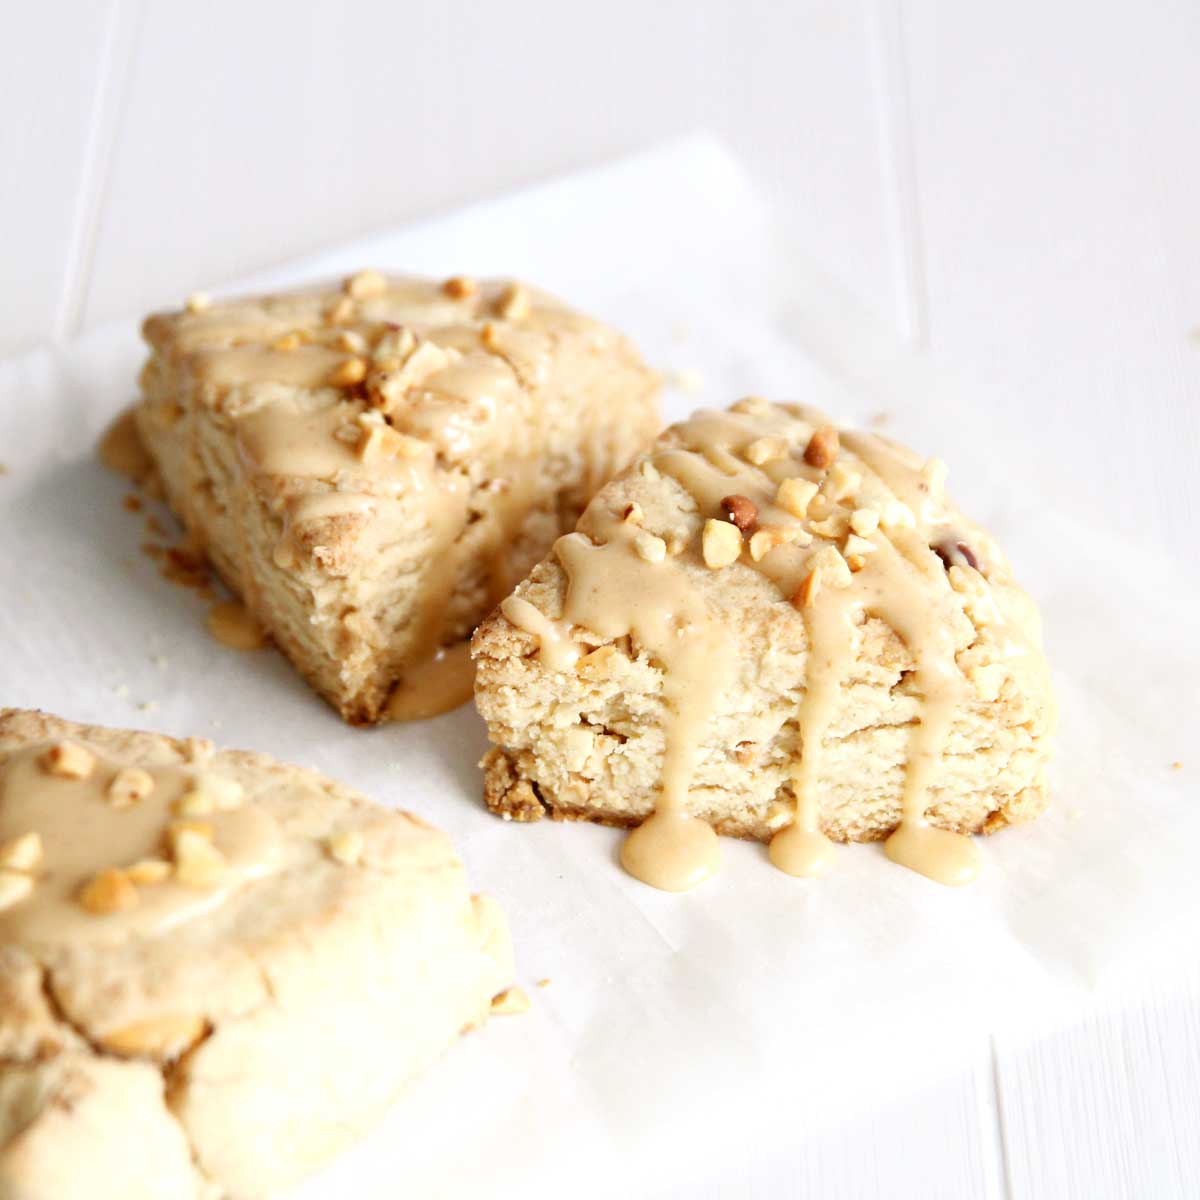 Peanut Butter Scones with a Creamy Glaze: Vegan and Irresistibly Nutty - Ricotta Almond Easter Eggs